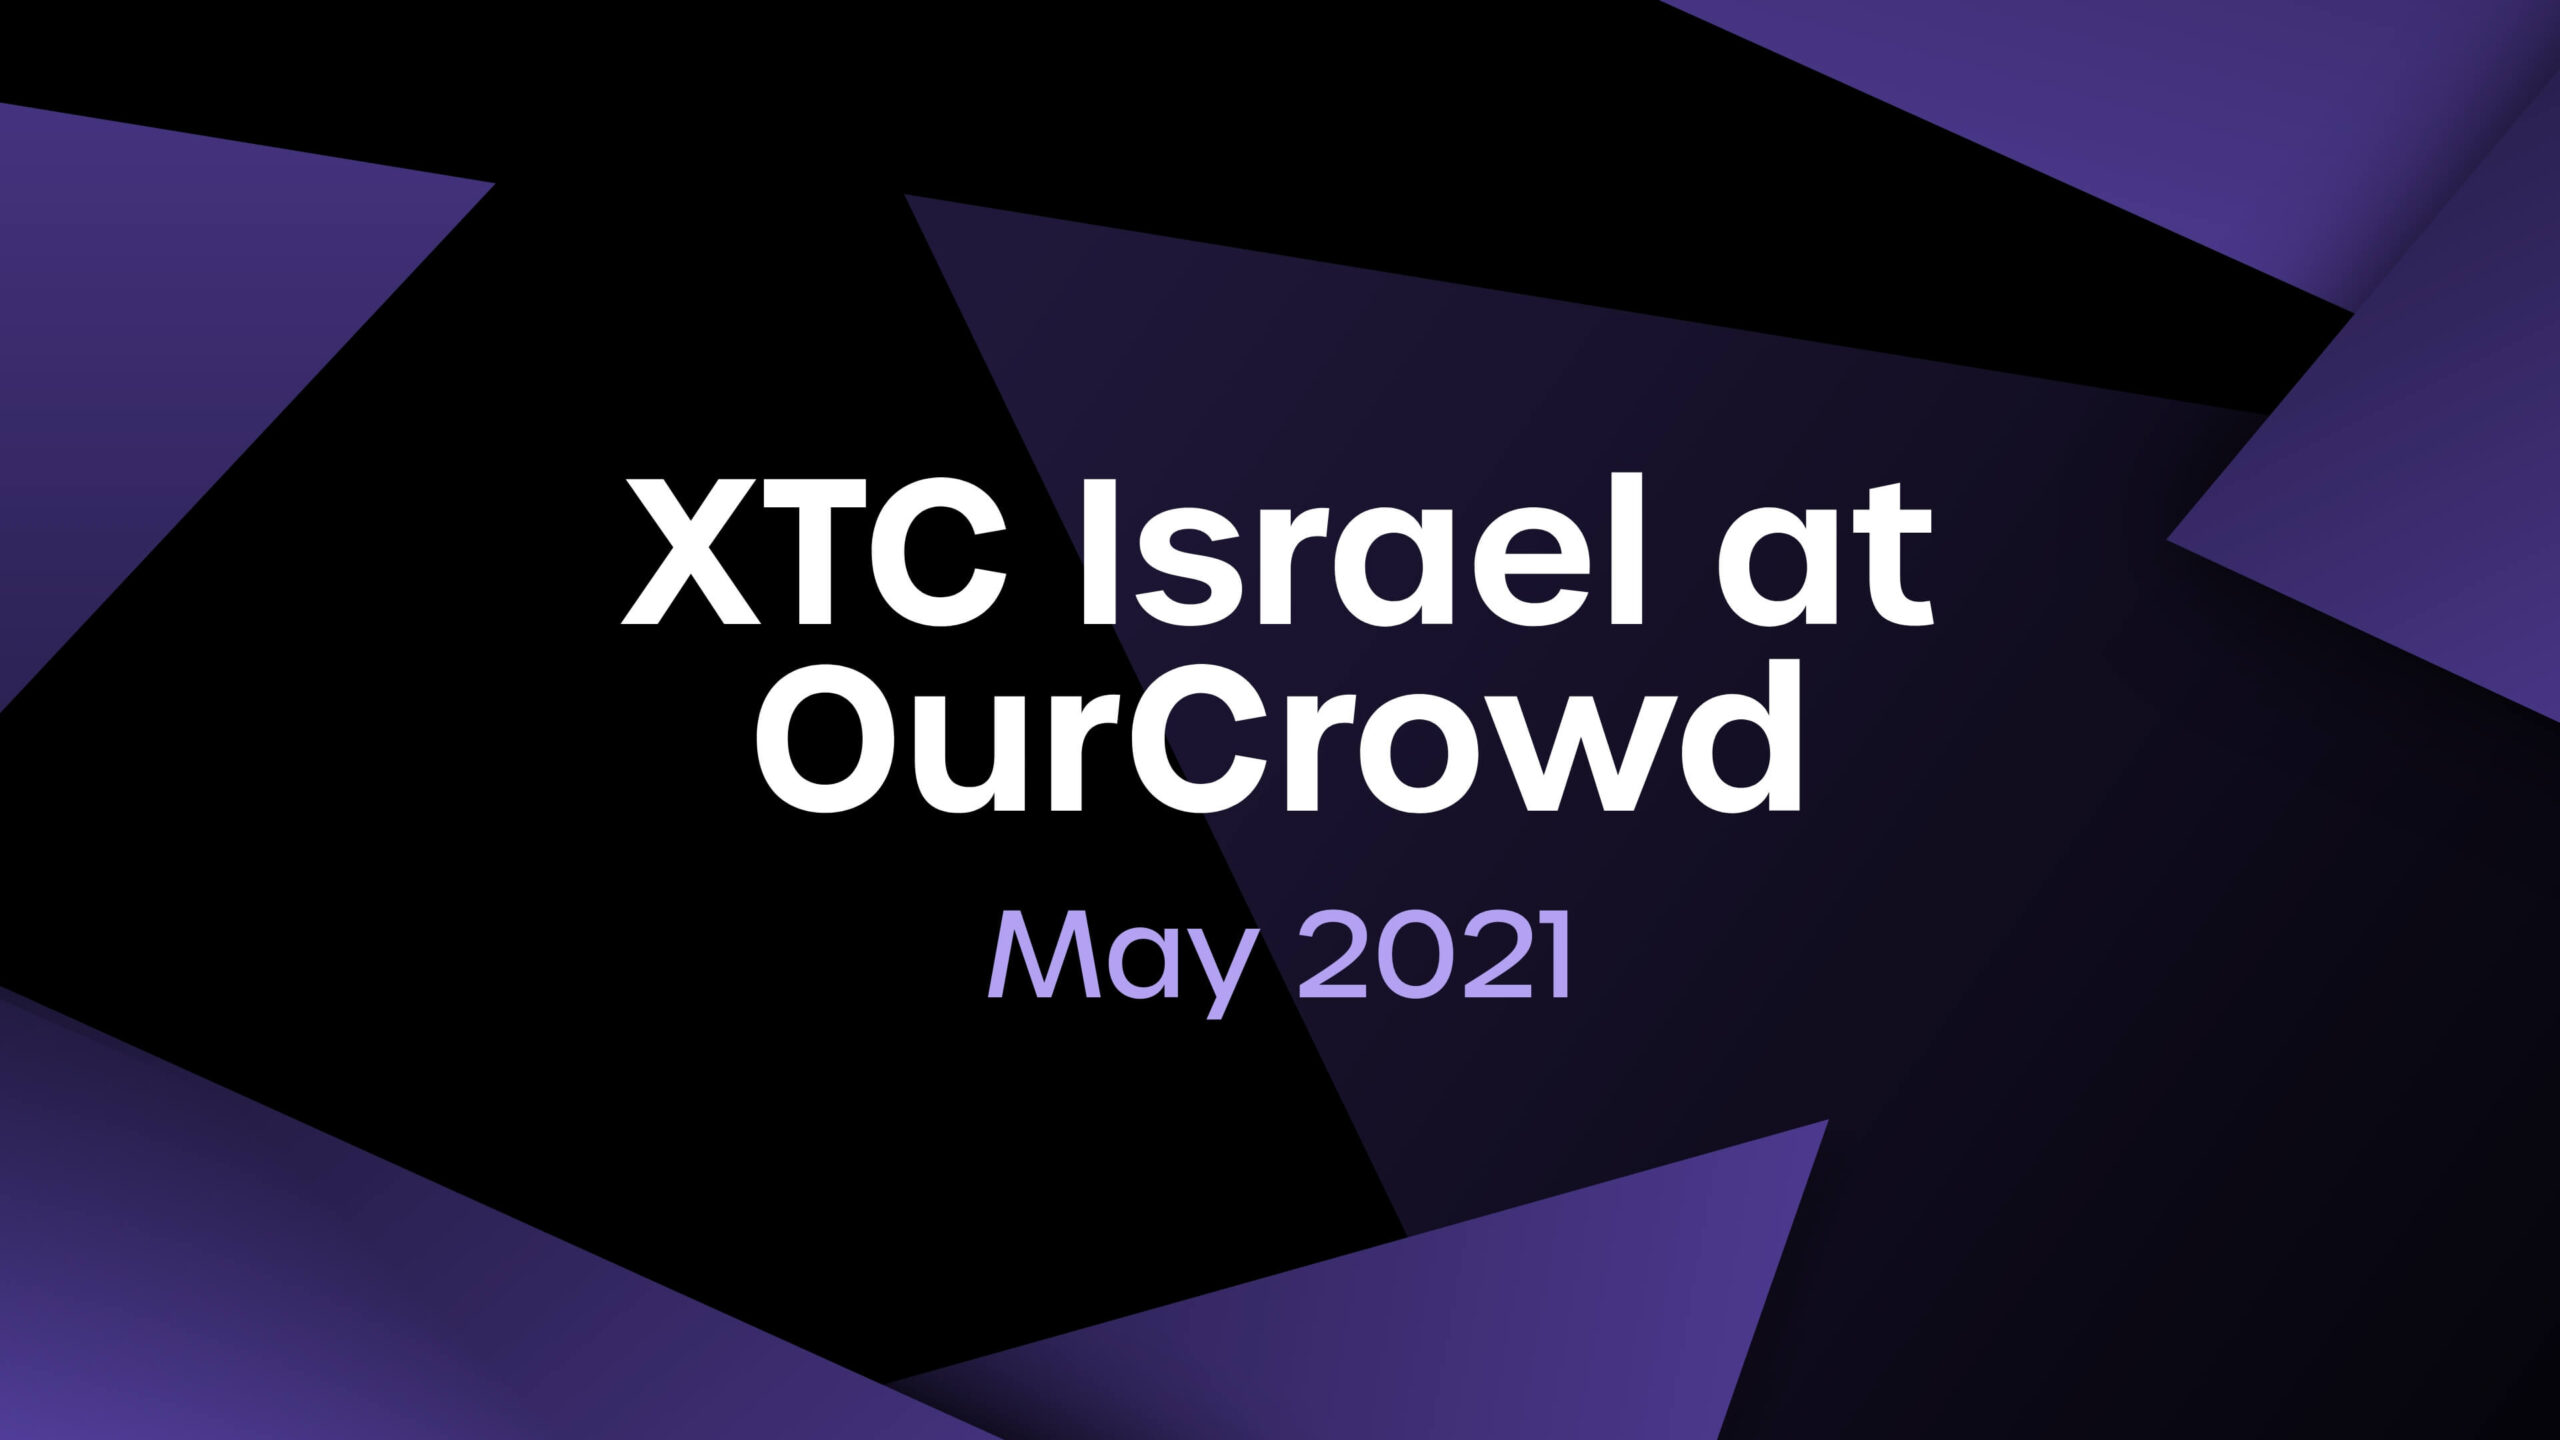 XTC Israel at OurCrowd